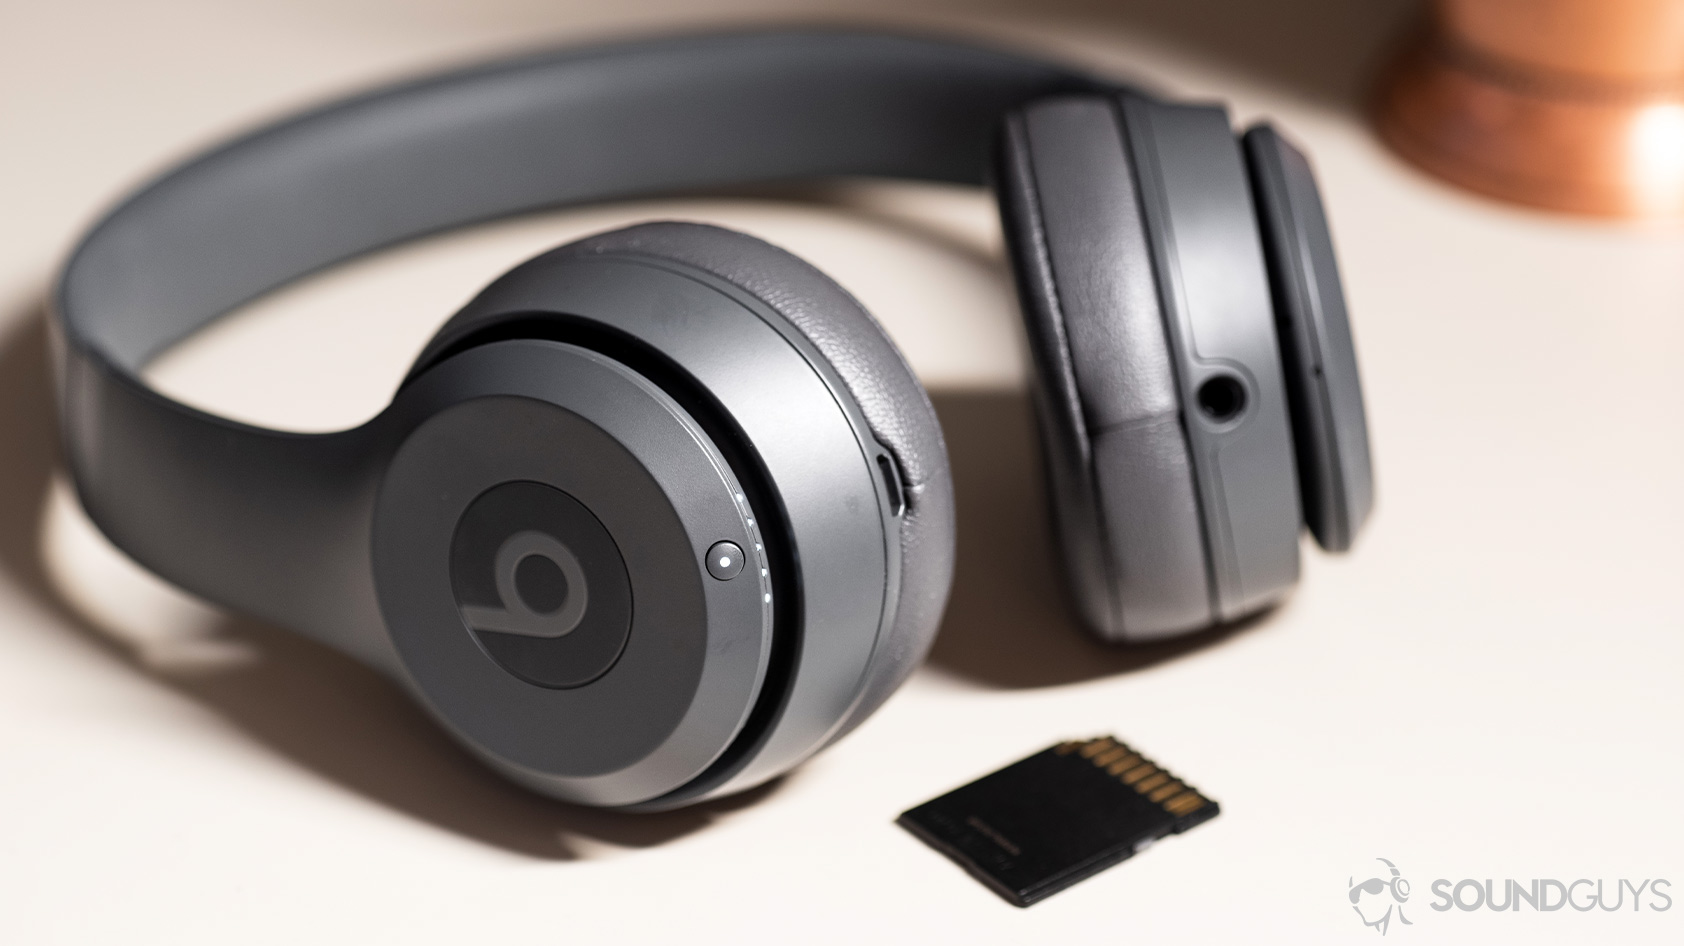 Beats Solo3 Wireless review - SoundGuys